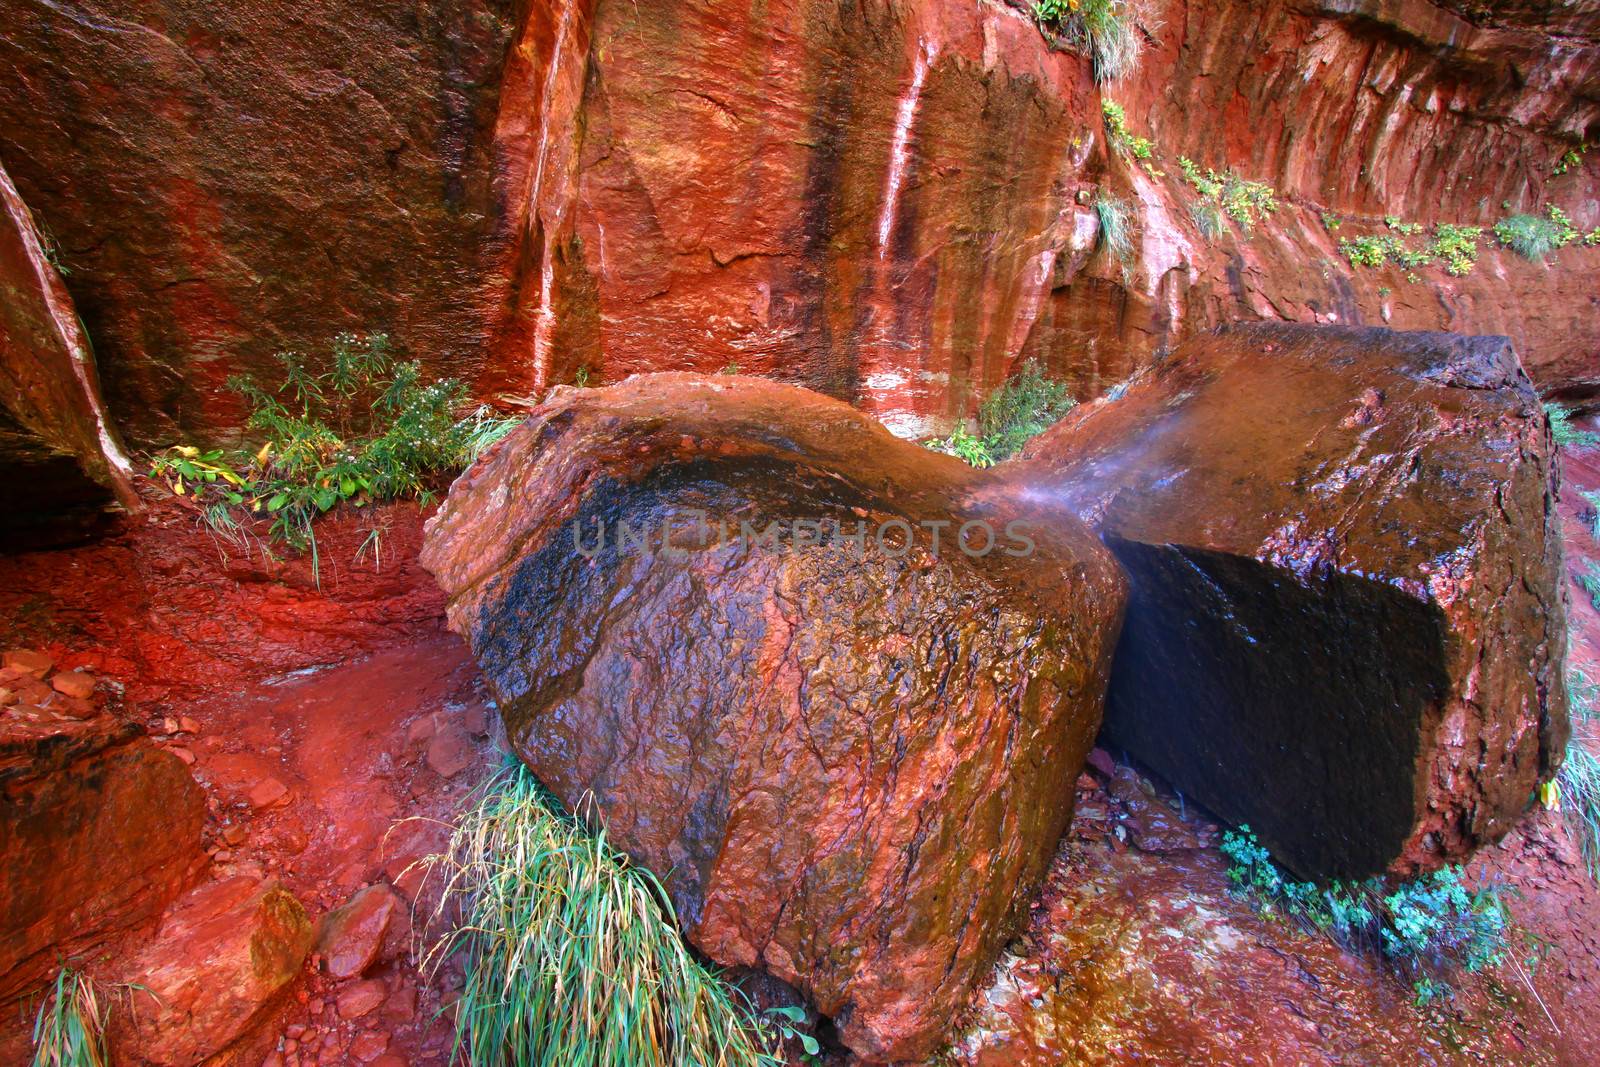 Vivid red rocks along the Emerald Pool Trail of Zion National Park.